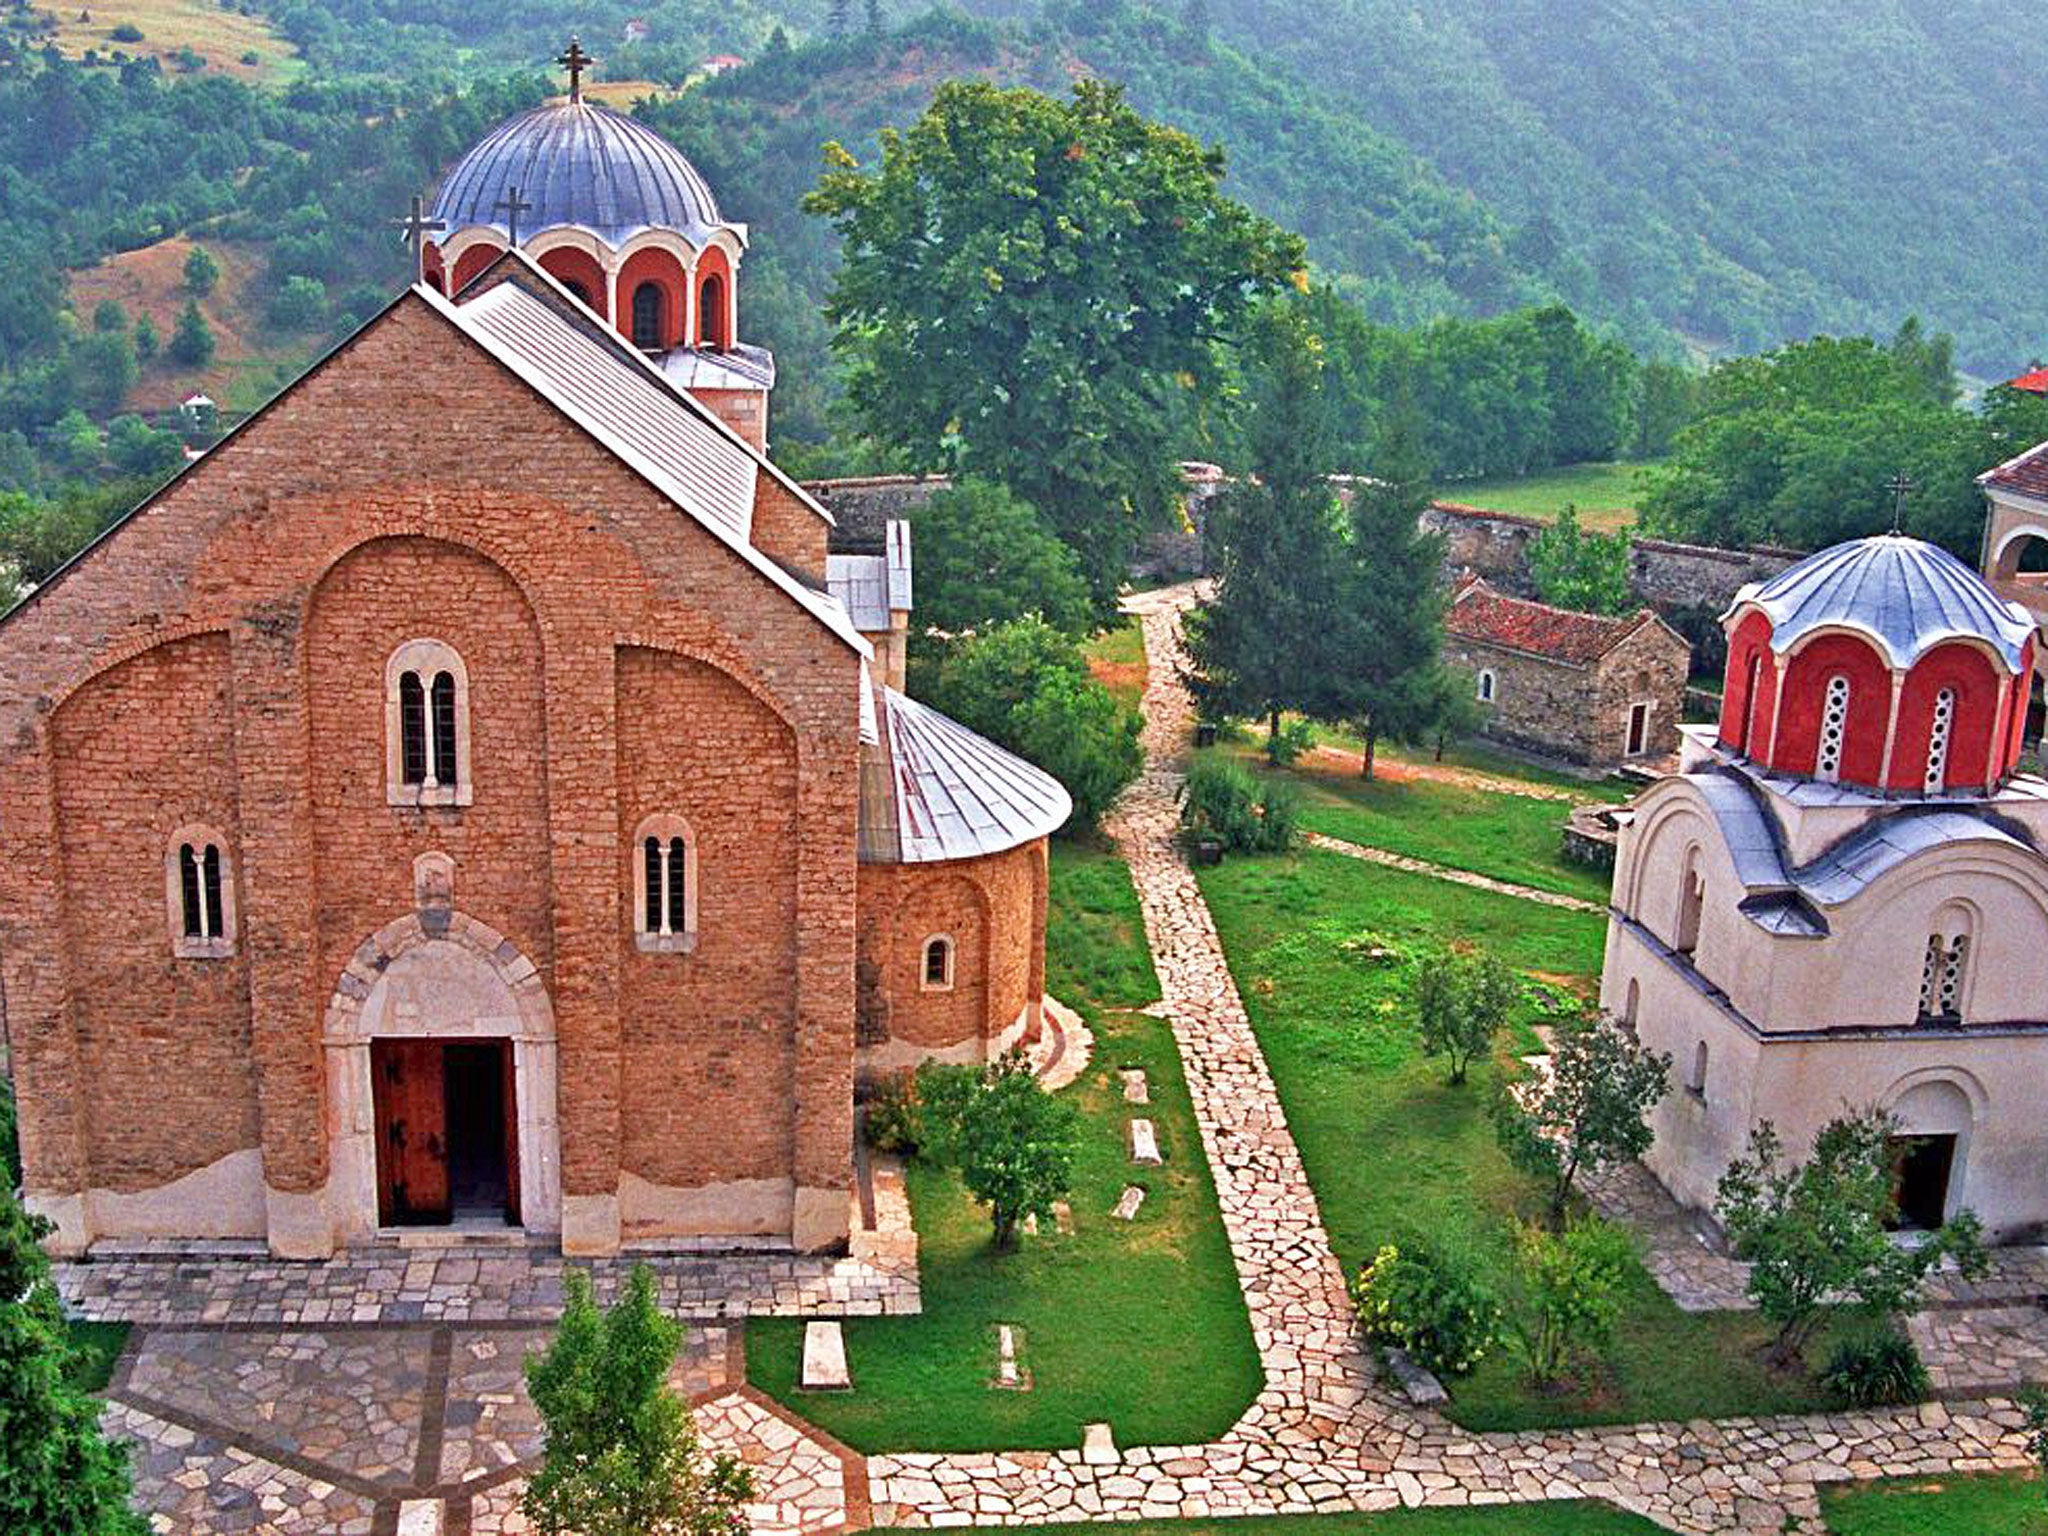 The monastery at Studenica is a world heritage site